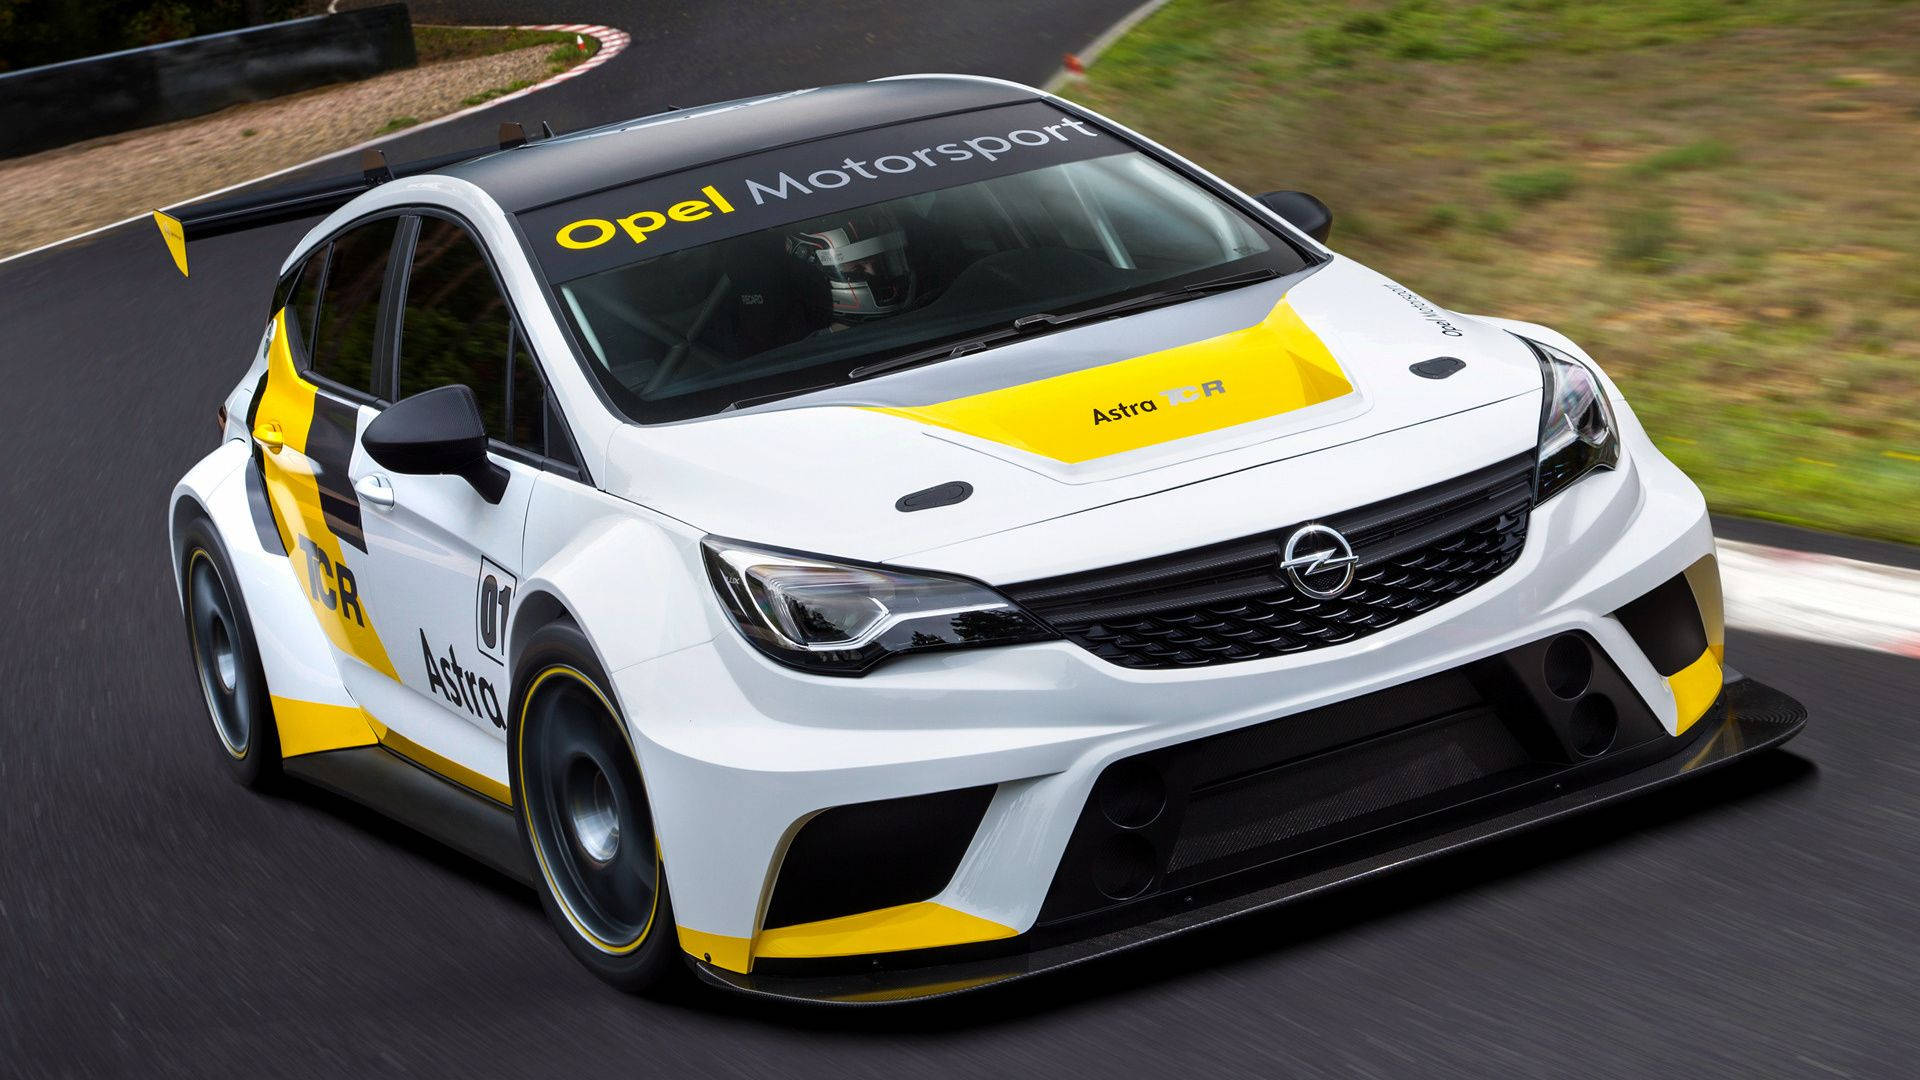 Opel Astra Tcr Wallpapers